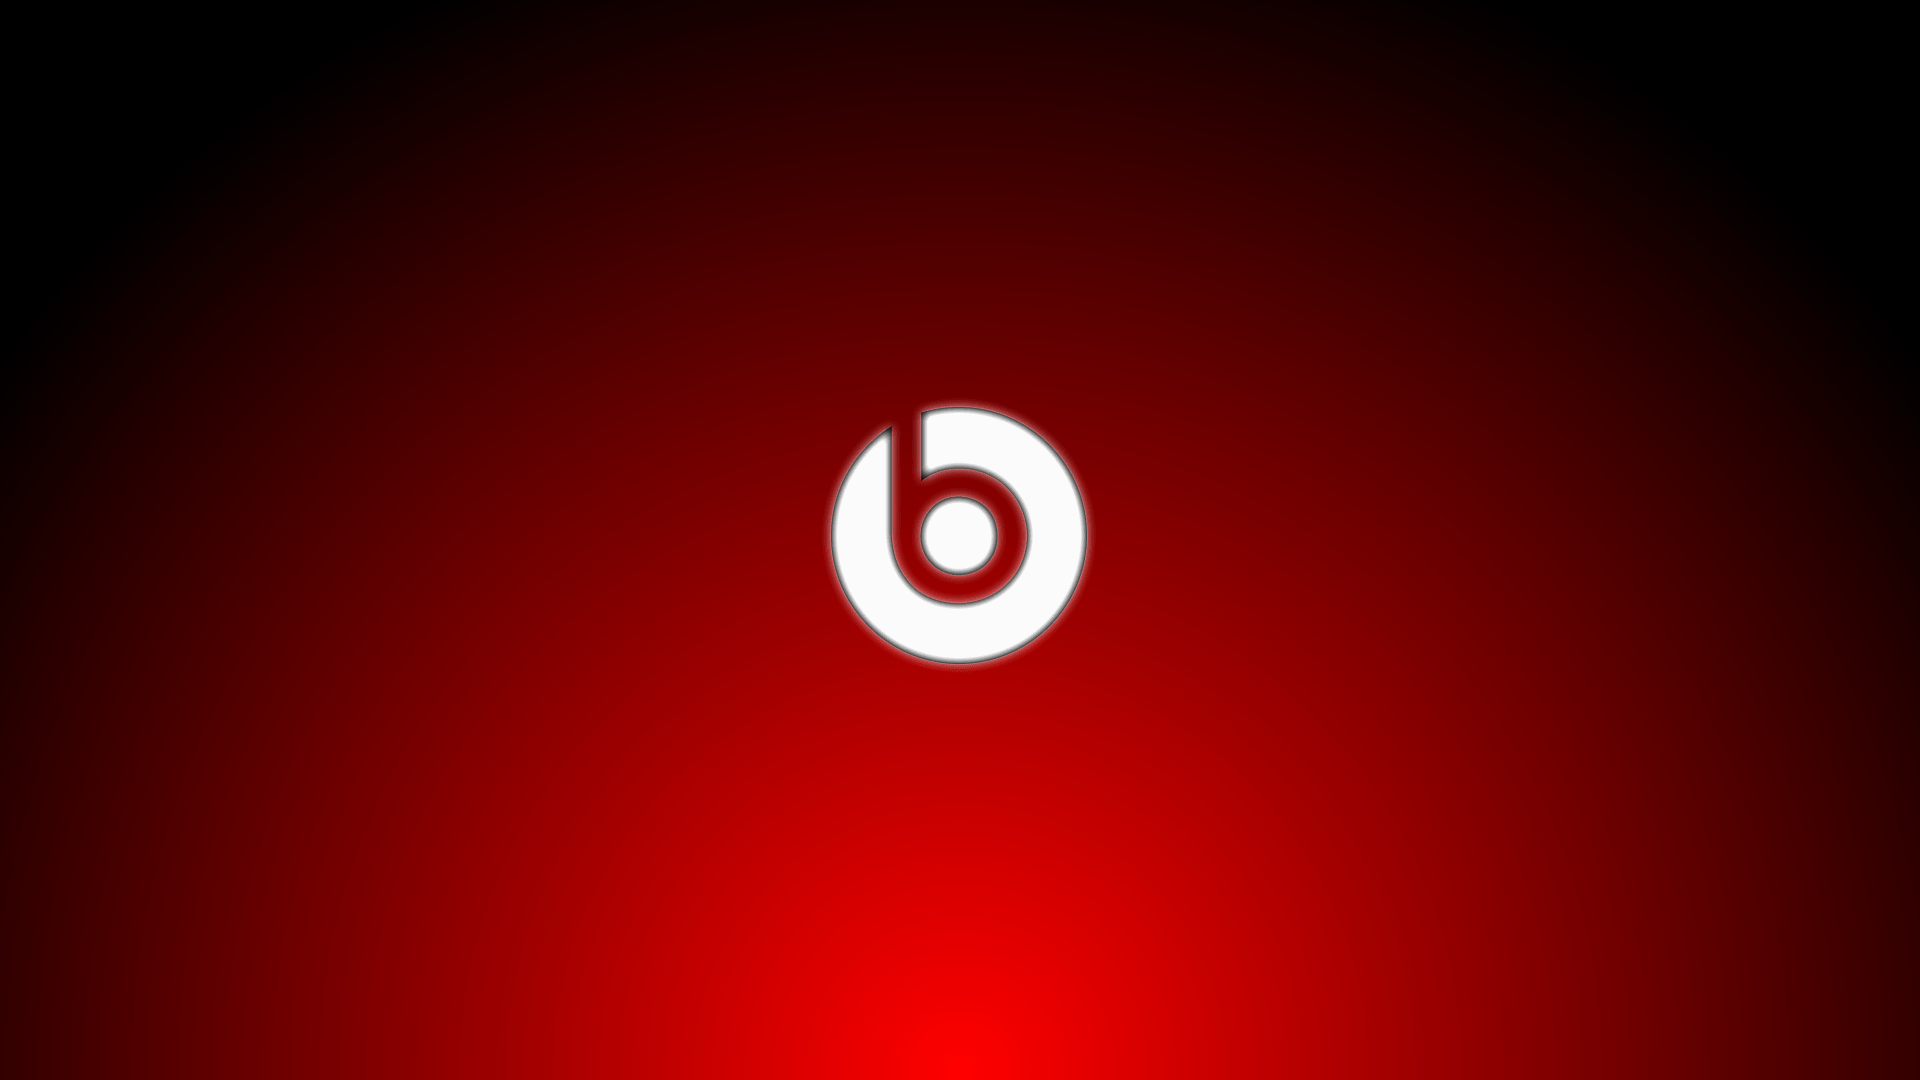 Red Beats Logo - Red And White Beats Logo Wallpaper